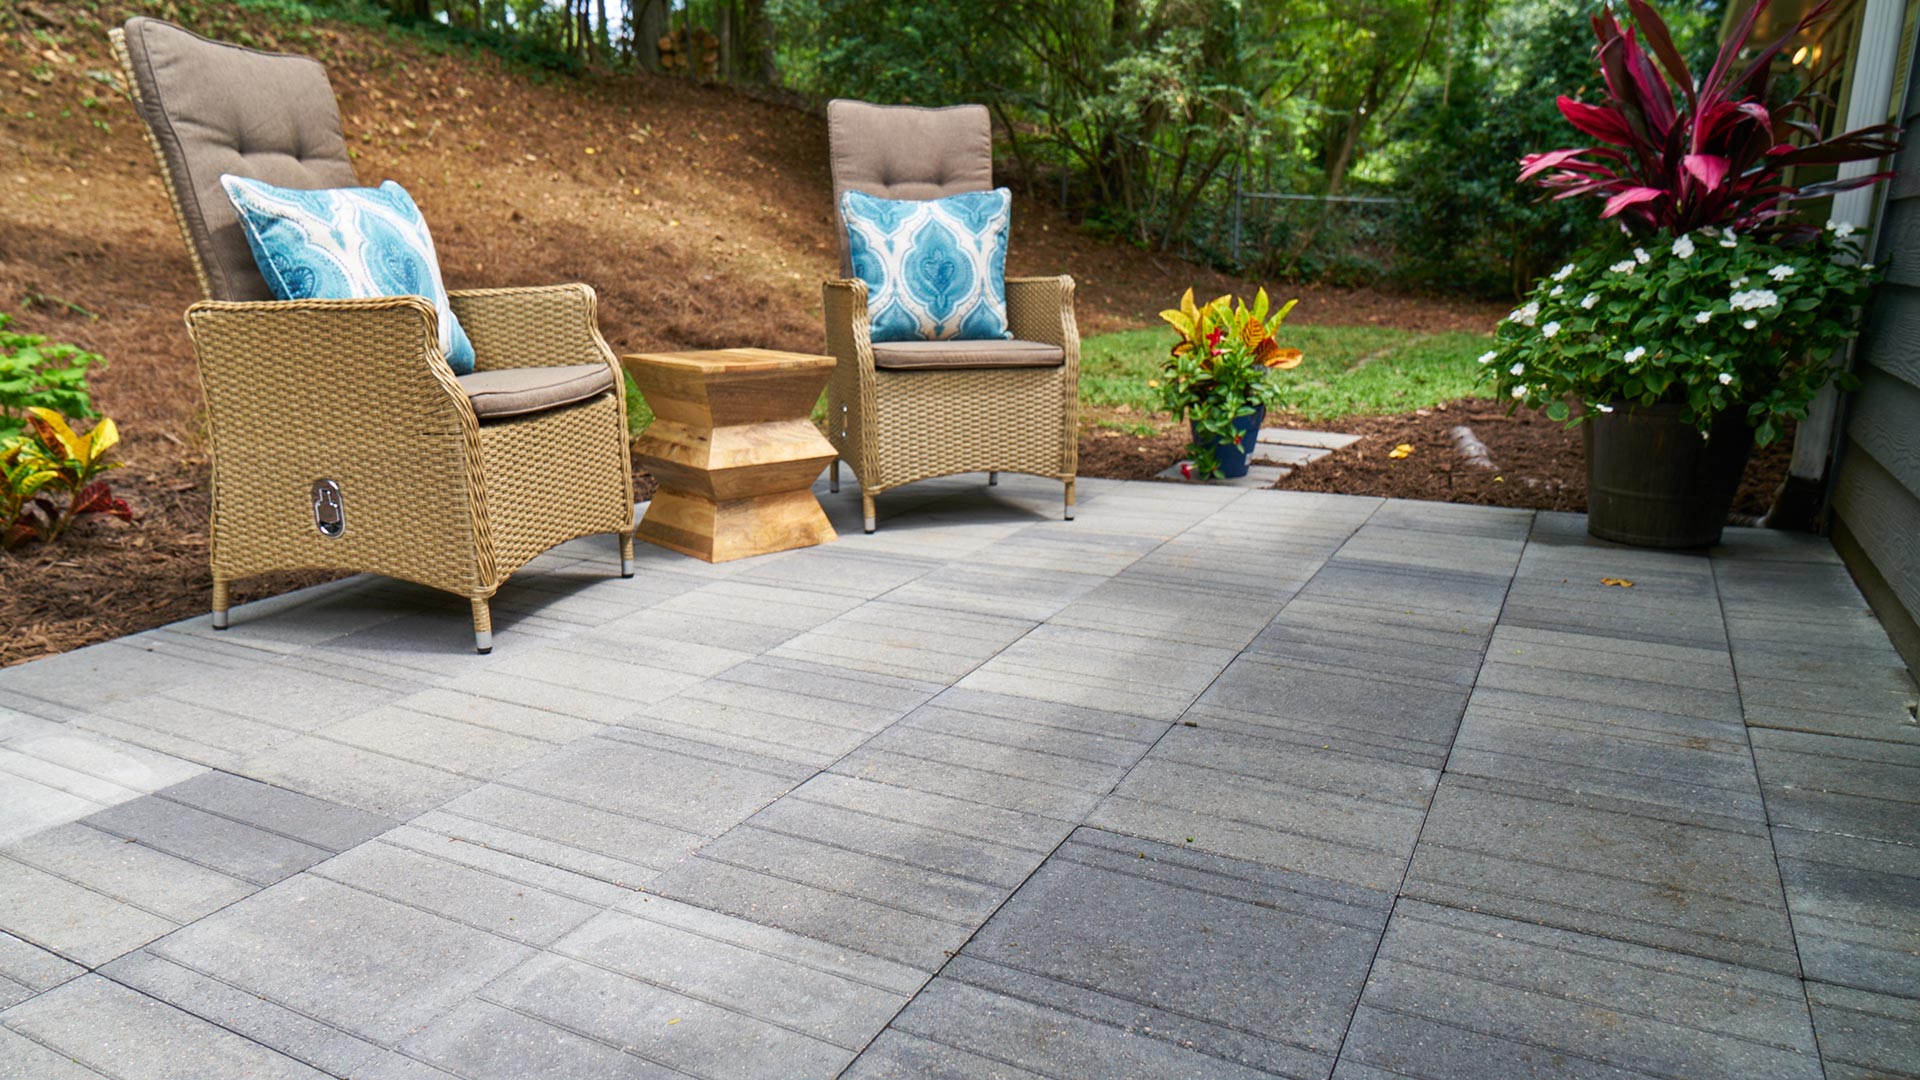 Luxurious Patio With Linear Pavers, Images Of Patios With Pavers